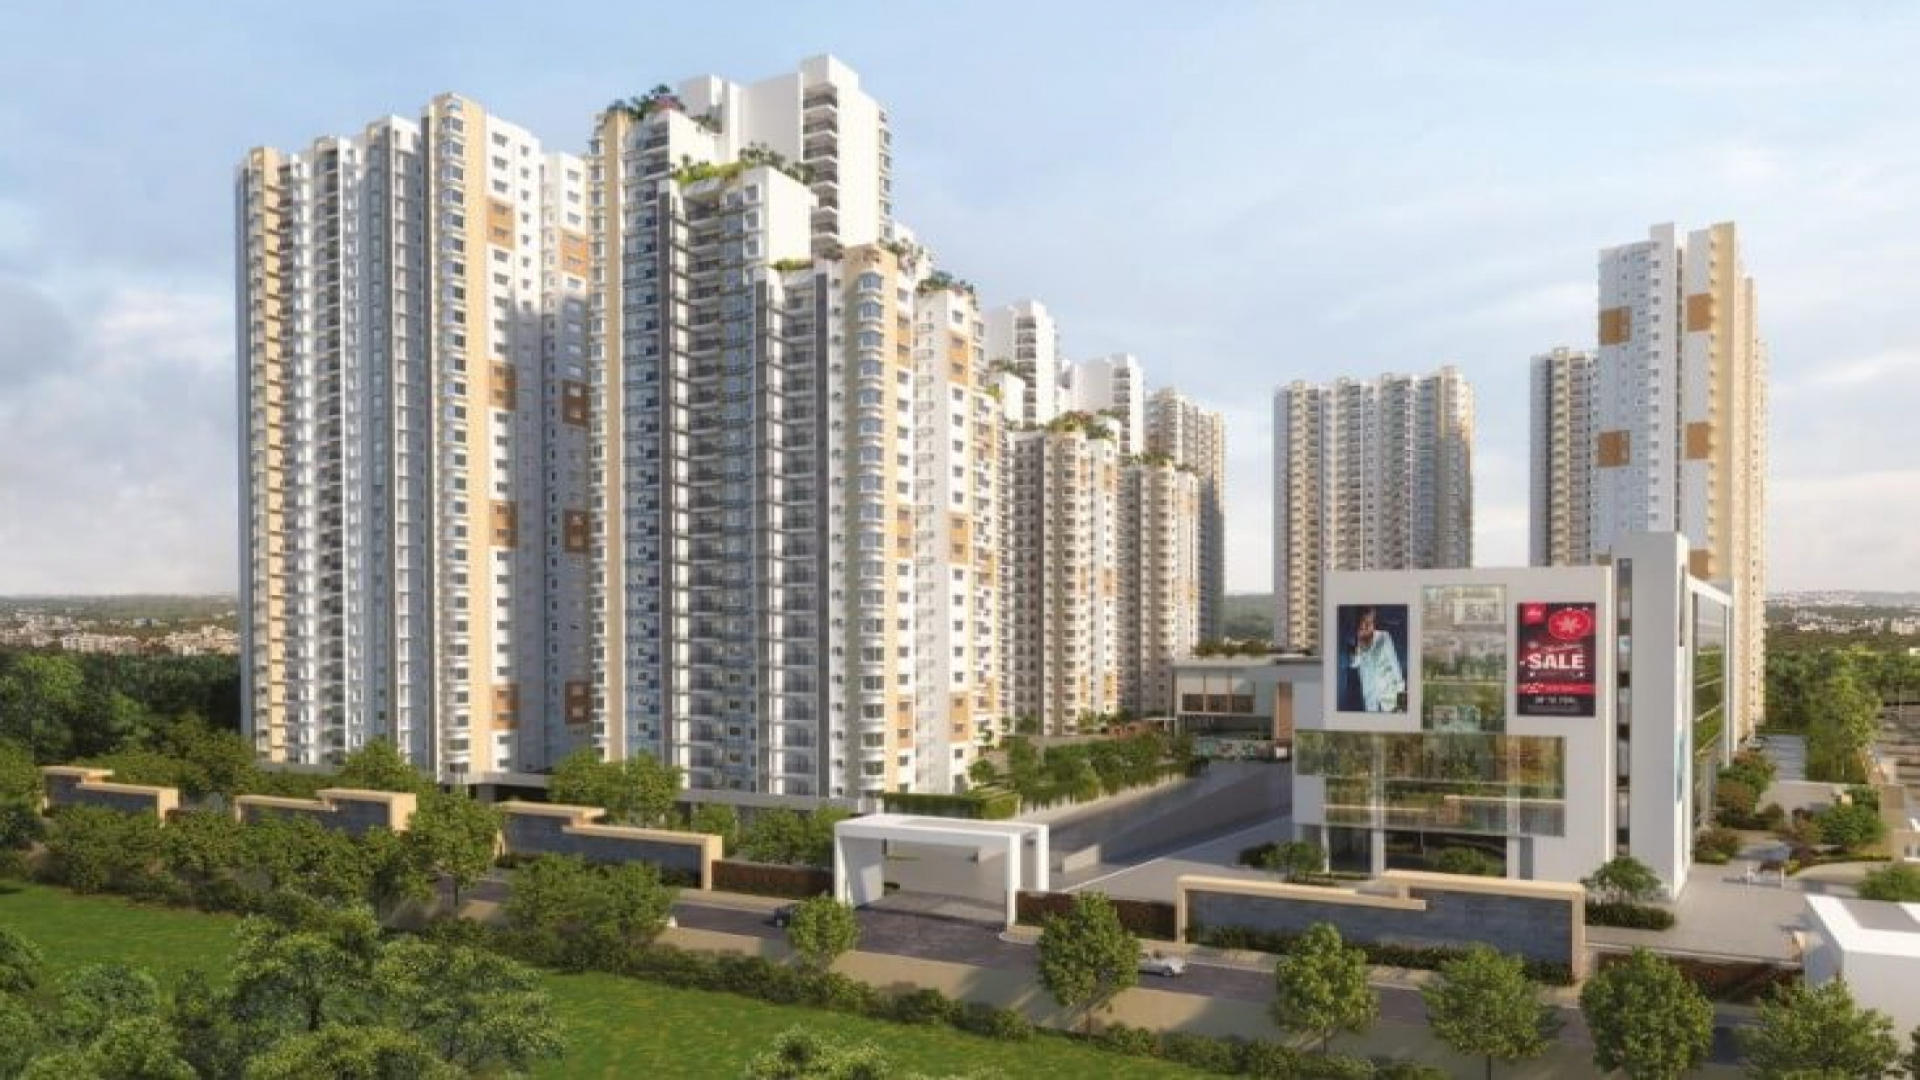 2, 3 BHK Apartment for sale in Perumbakkam